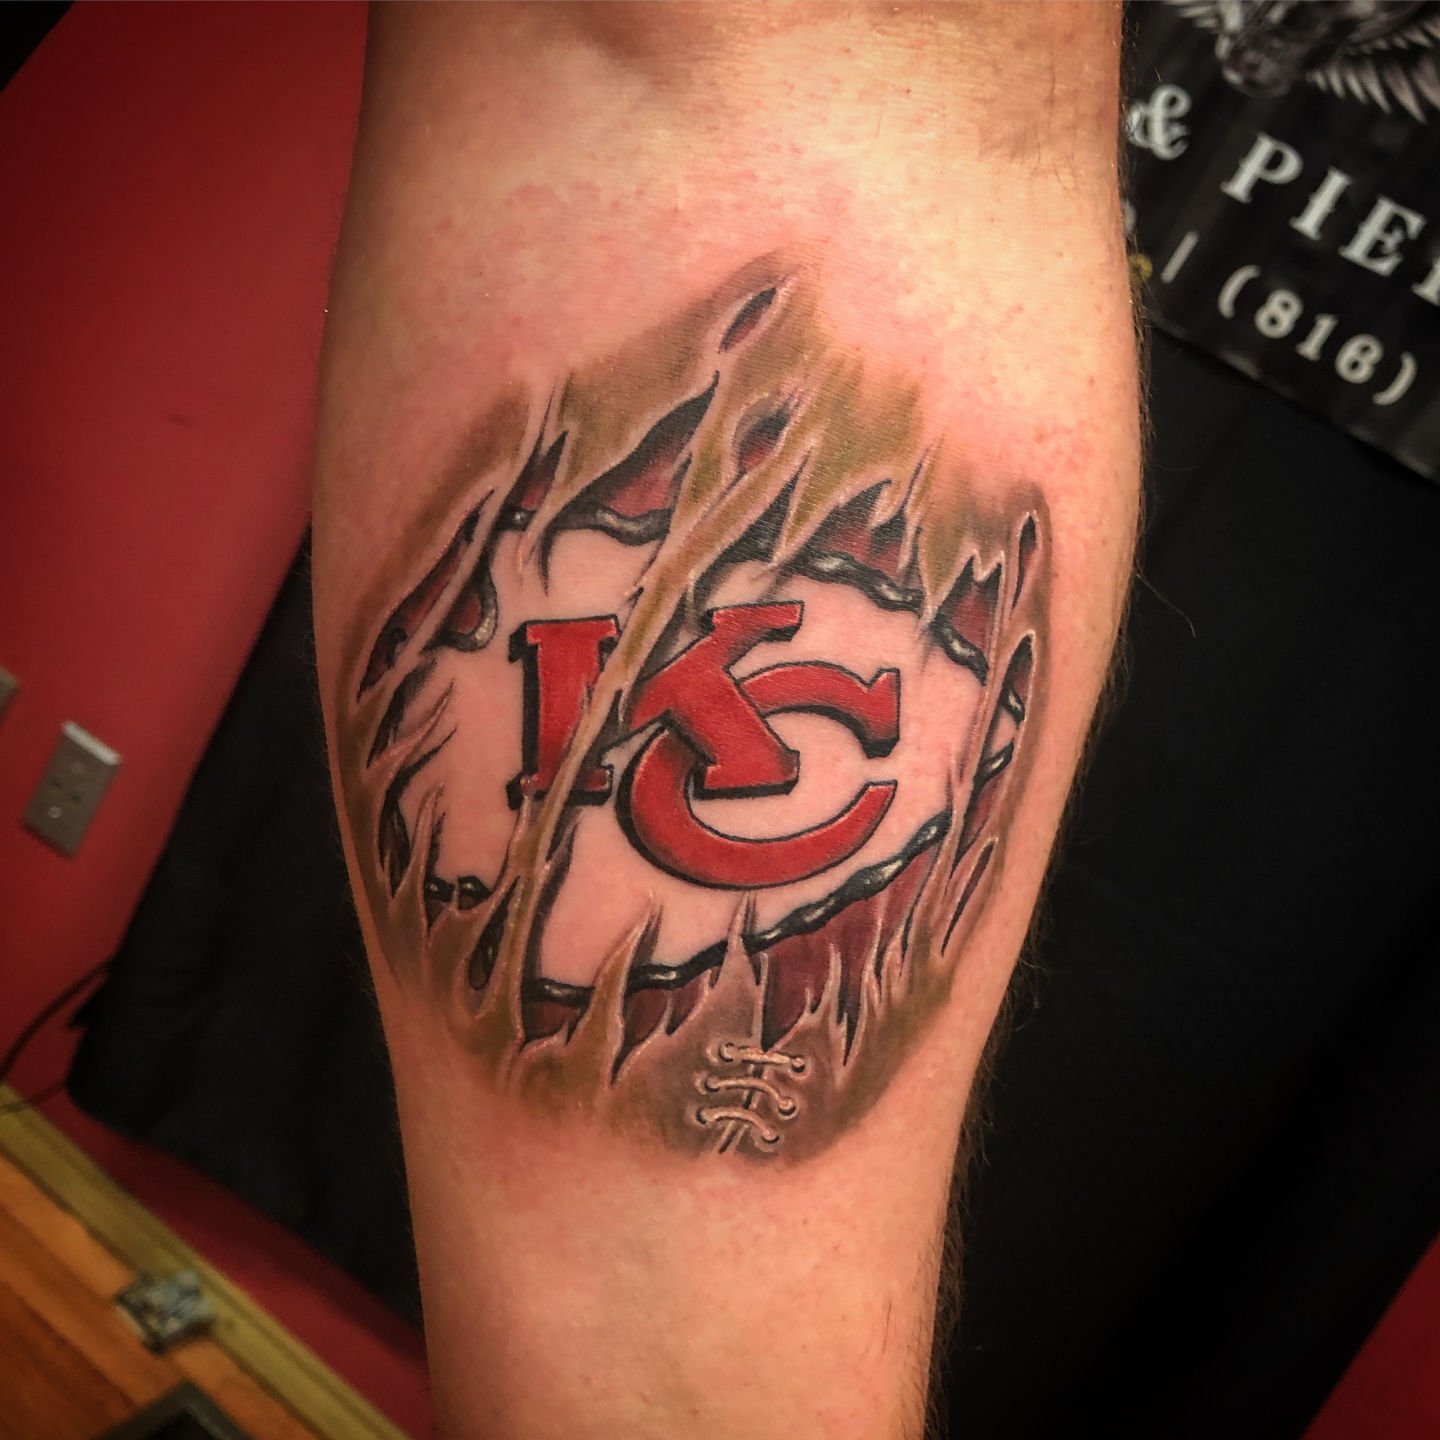 Patrick Mahomes unveils tattoo of his babys hands on his calves